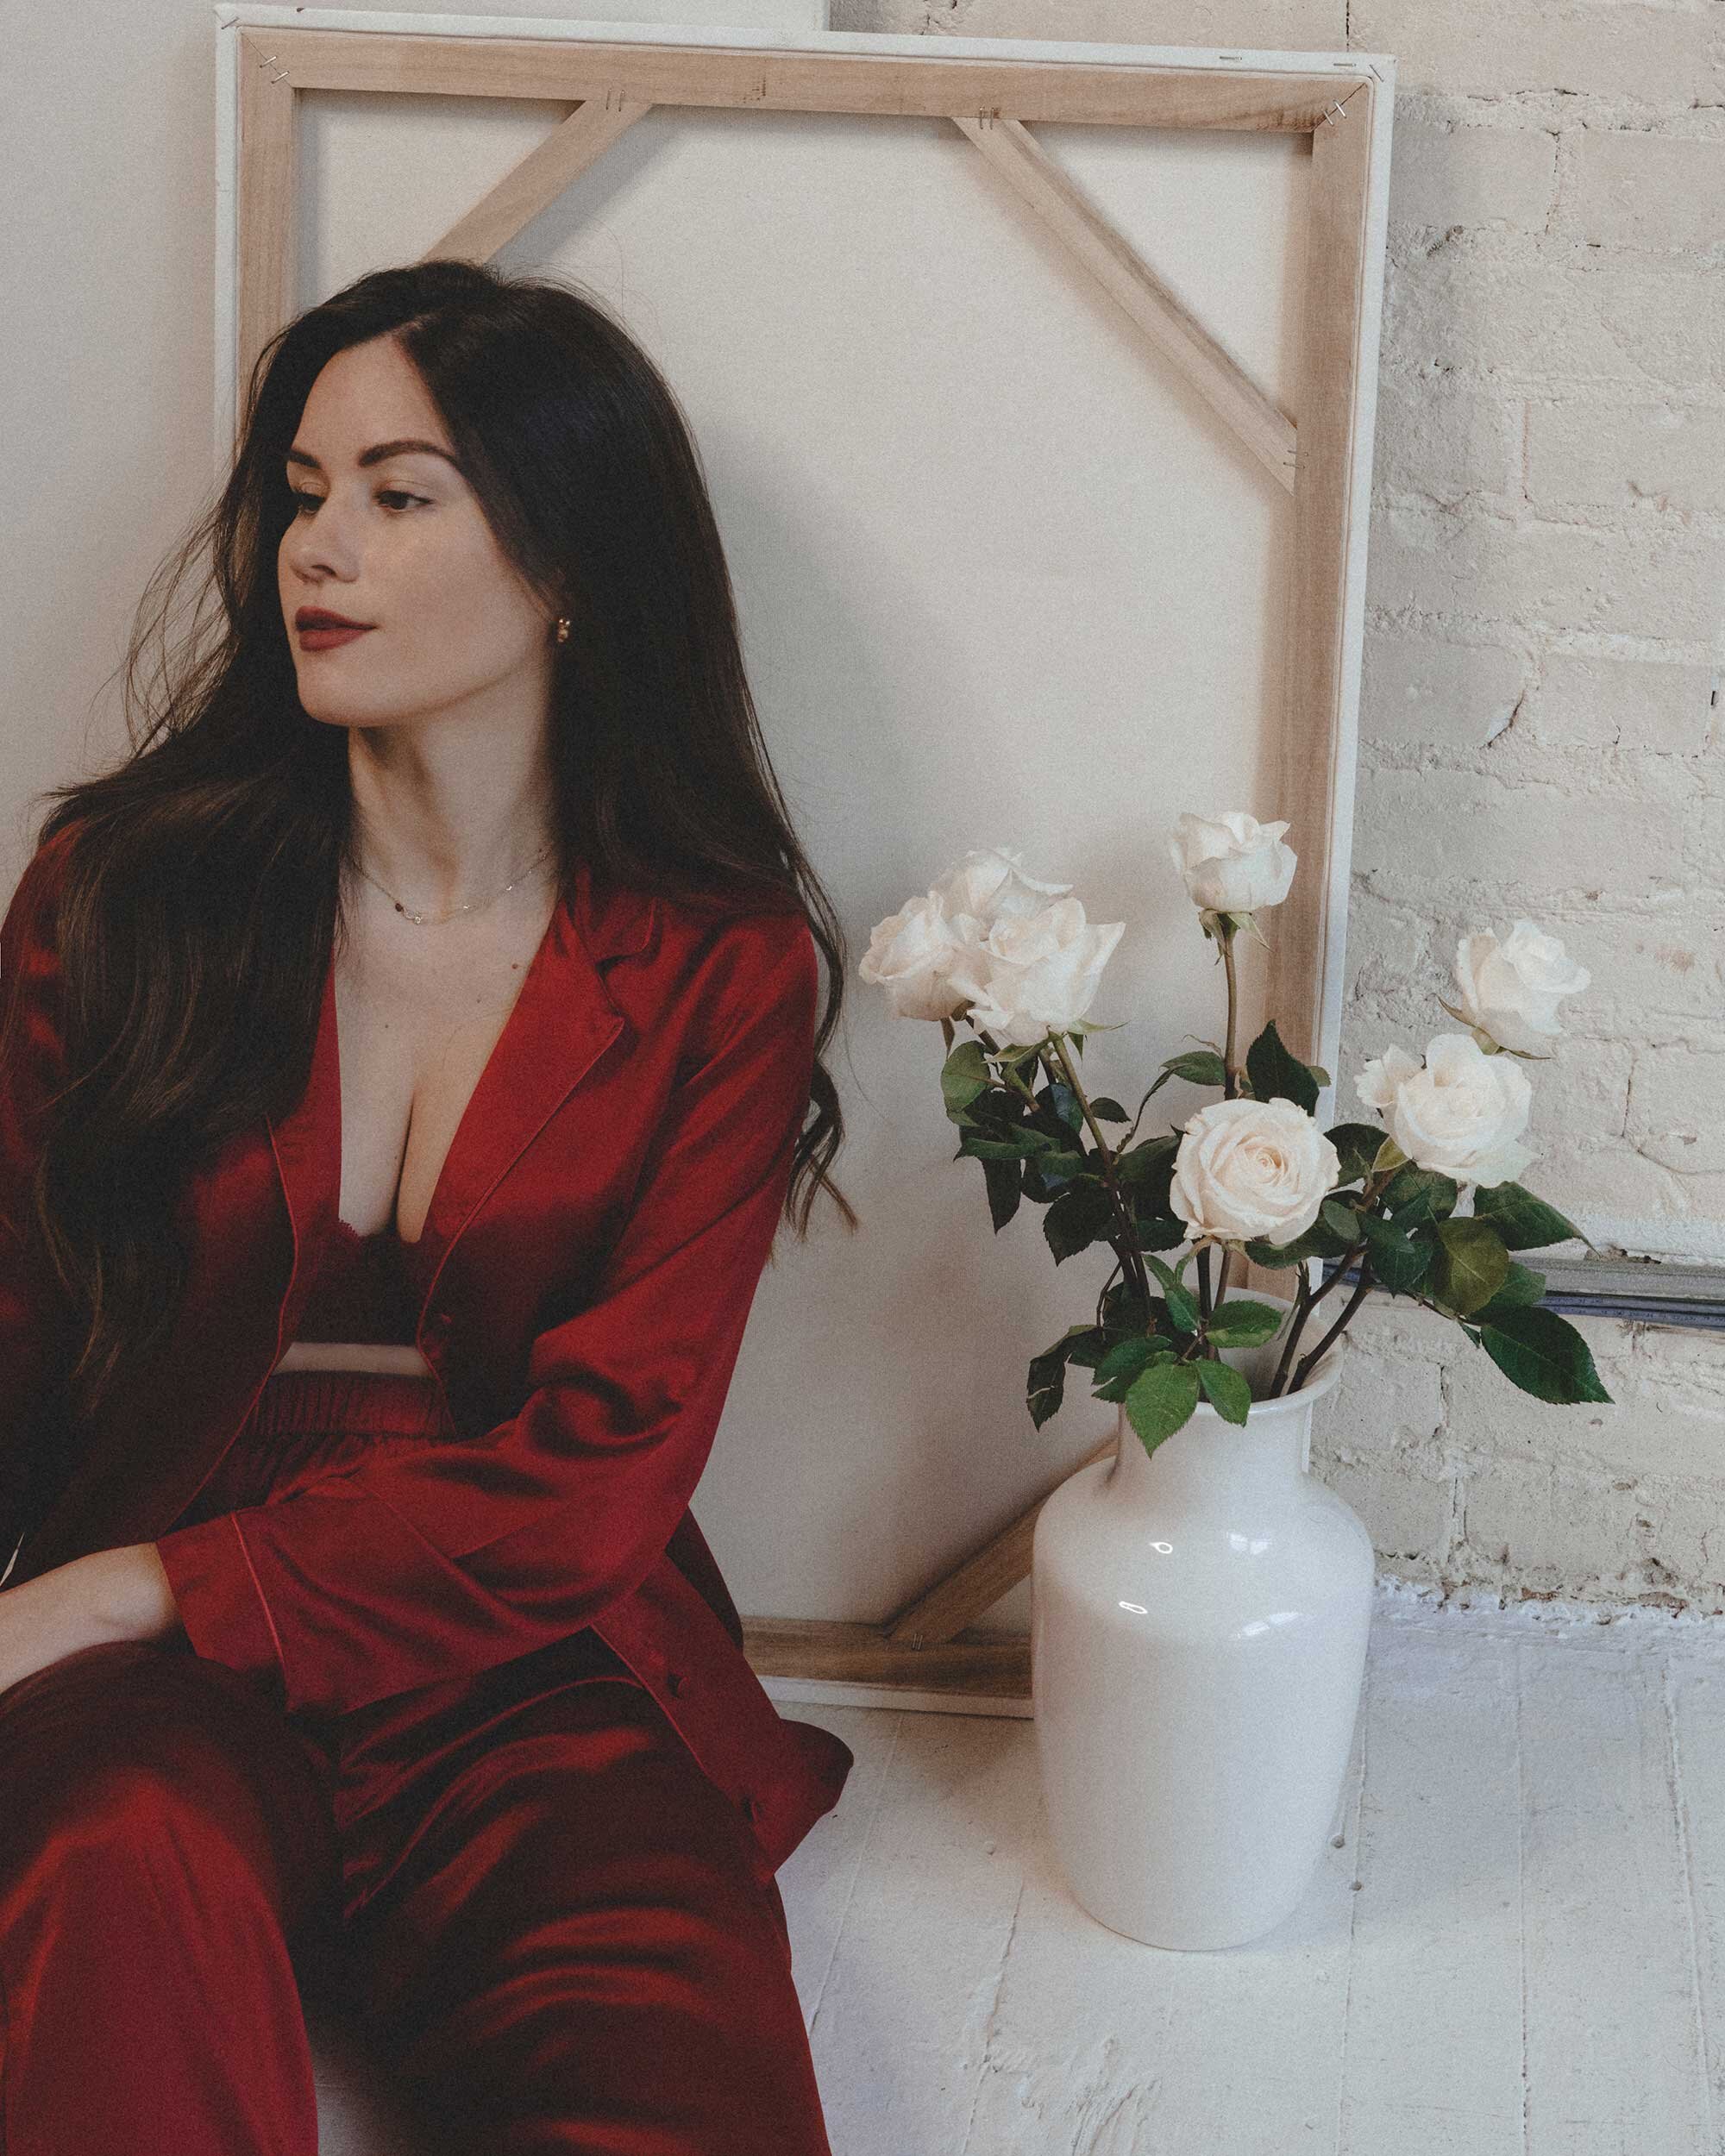 Perfect Chic Valentine’s Day Pajamas. Sarah Butler of @SarahChristine wearing  Intimissimi Red Silk Satin Boyfriend-fit Pajamas and Intimissimi Sofia Lace Balconette Bra for Valentine’s Day outfit -12.jpg